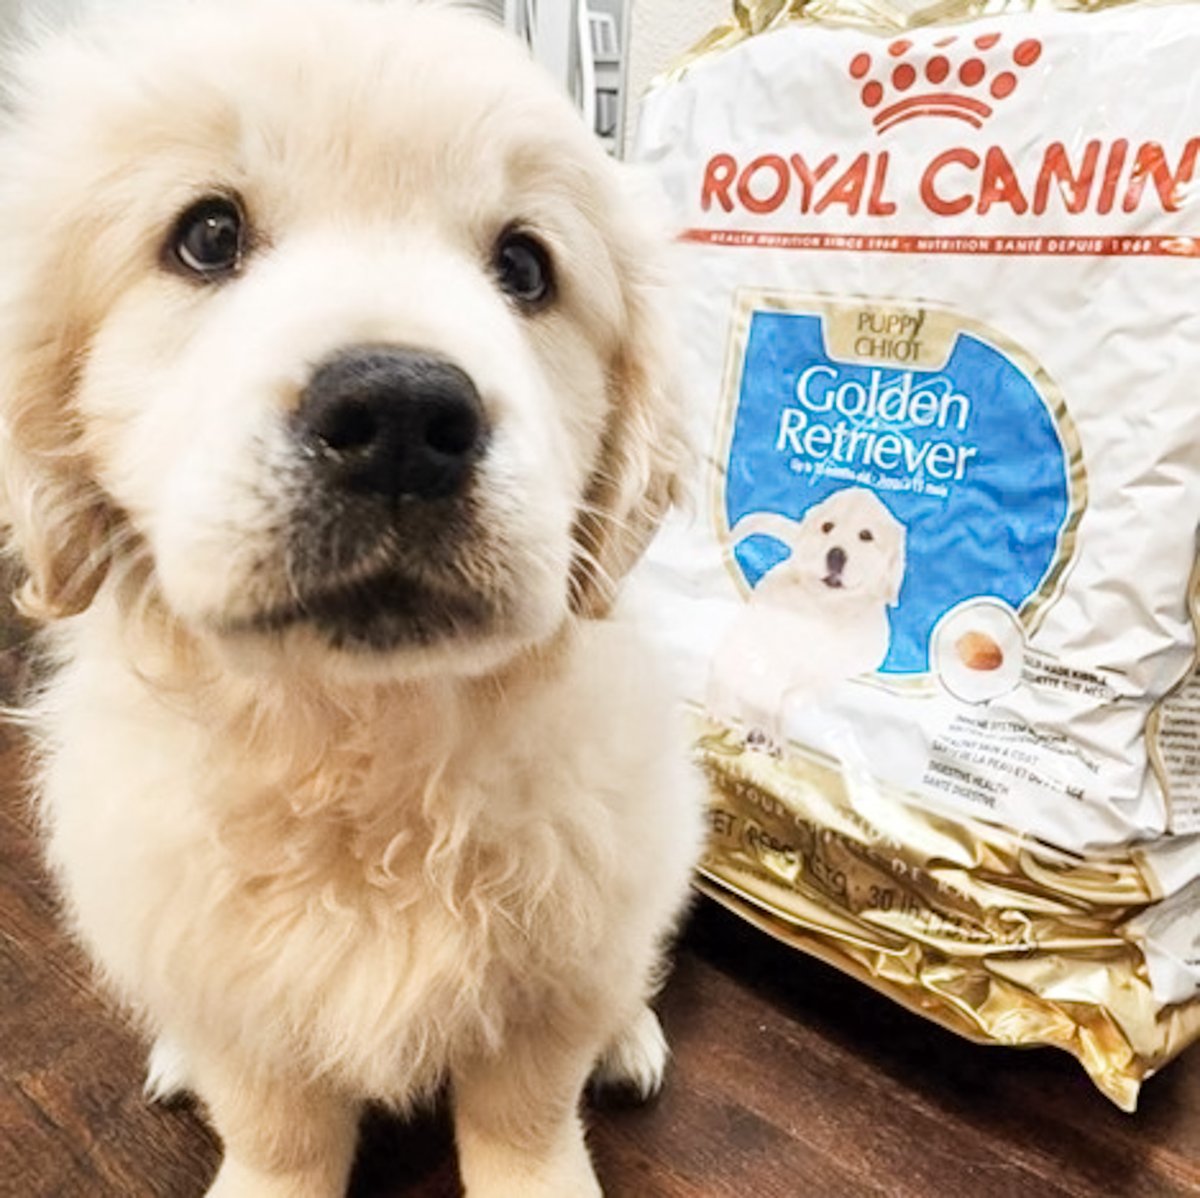 ⭐⭐⭐⭐⭐ from the Mom of Sunny! 
“This is the perfect food to follow a healthy slow growth plan for a Golden puppy.”

📷: @fuzzygoddesses